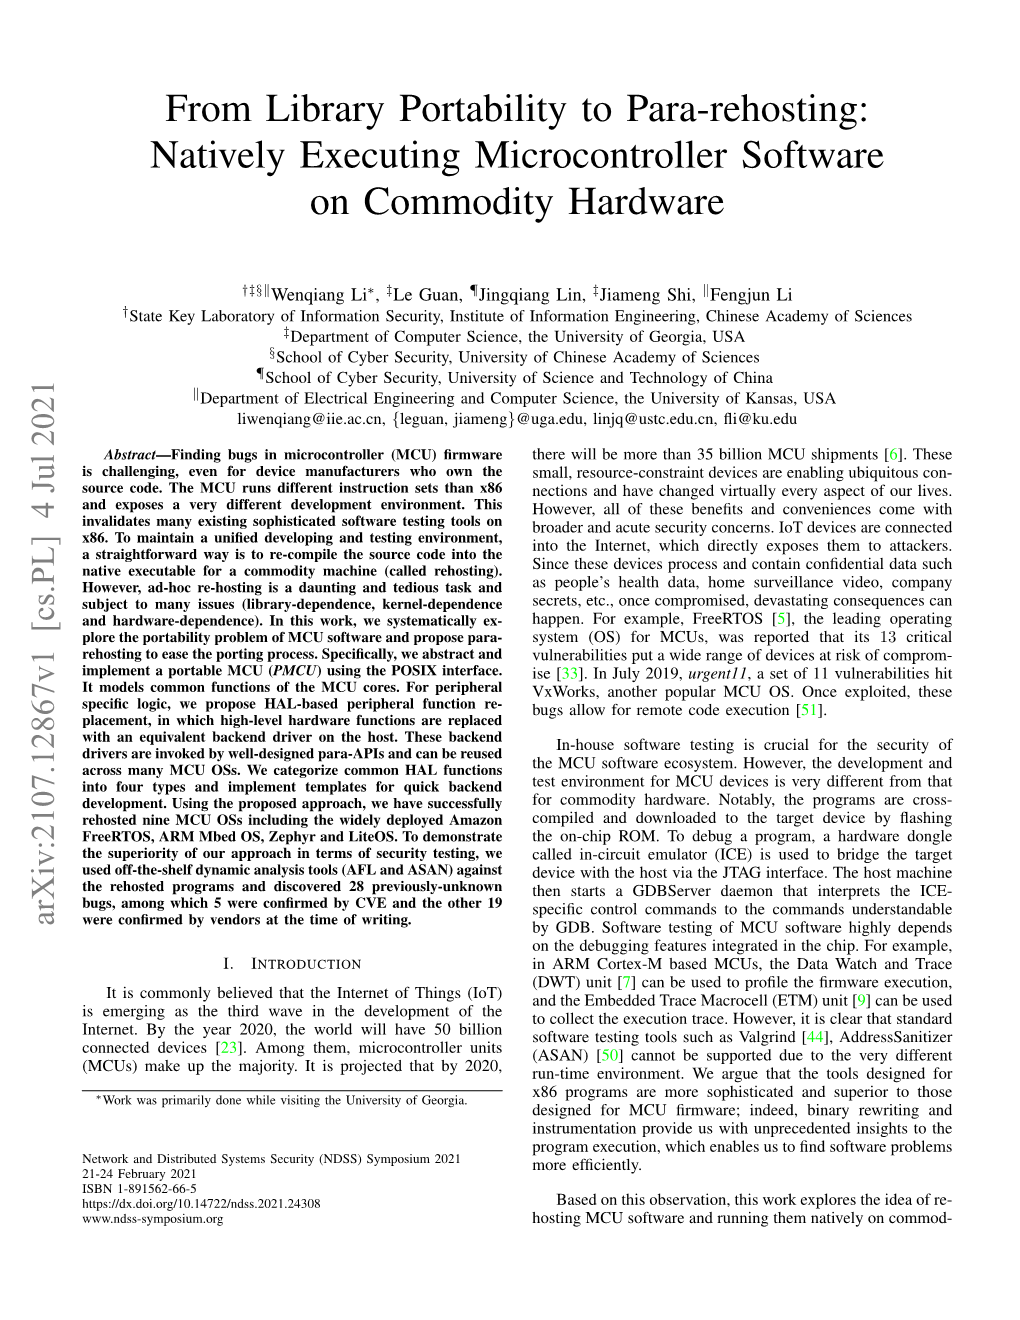 Natively Executing Microcontroller Software on Commodity Hardware